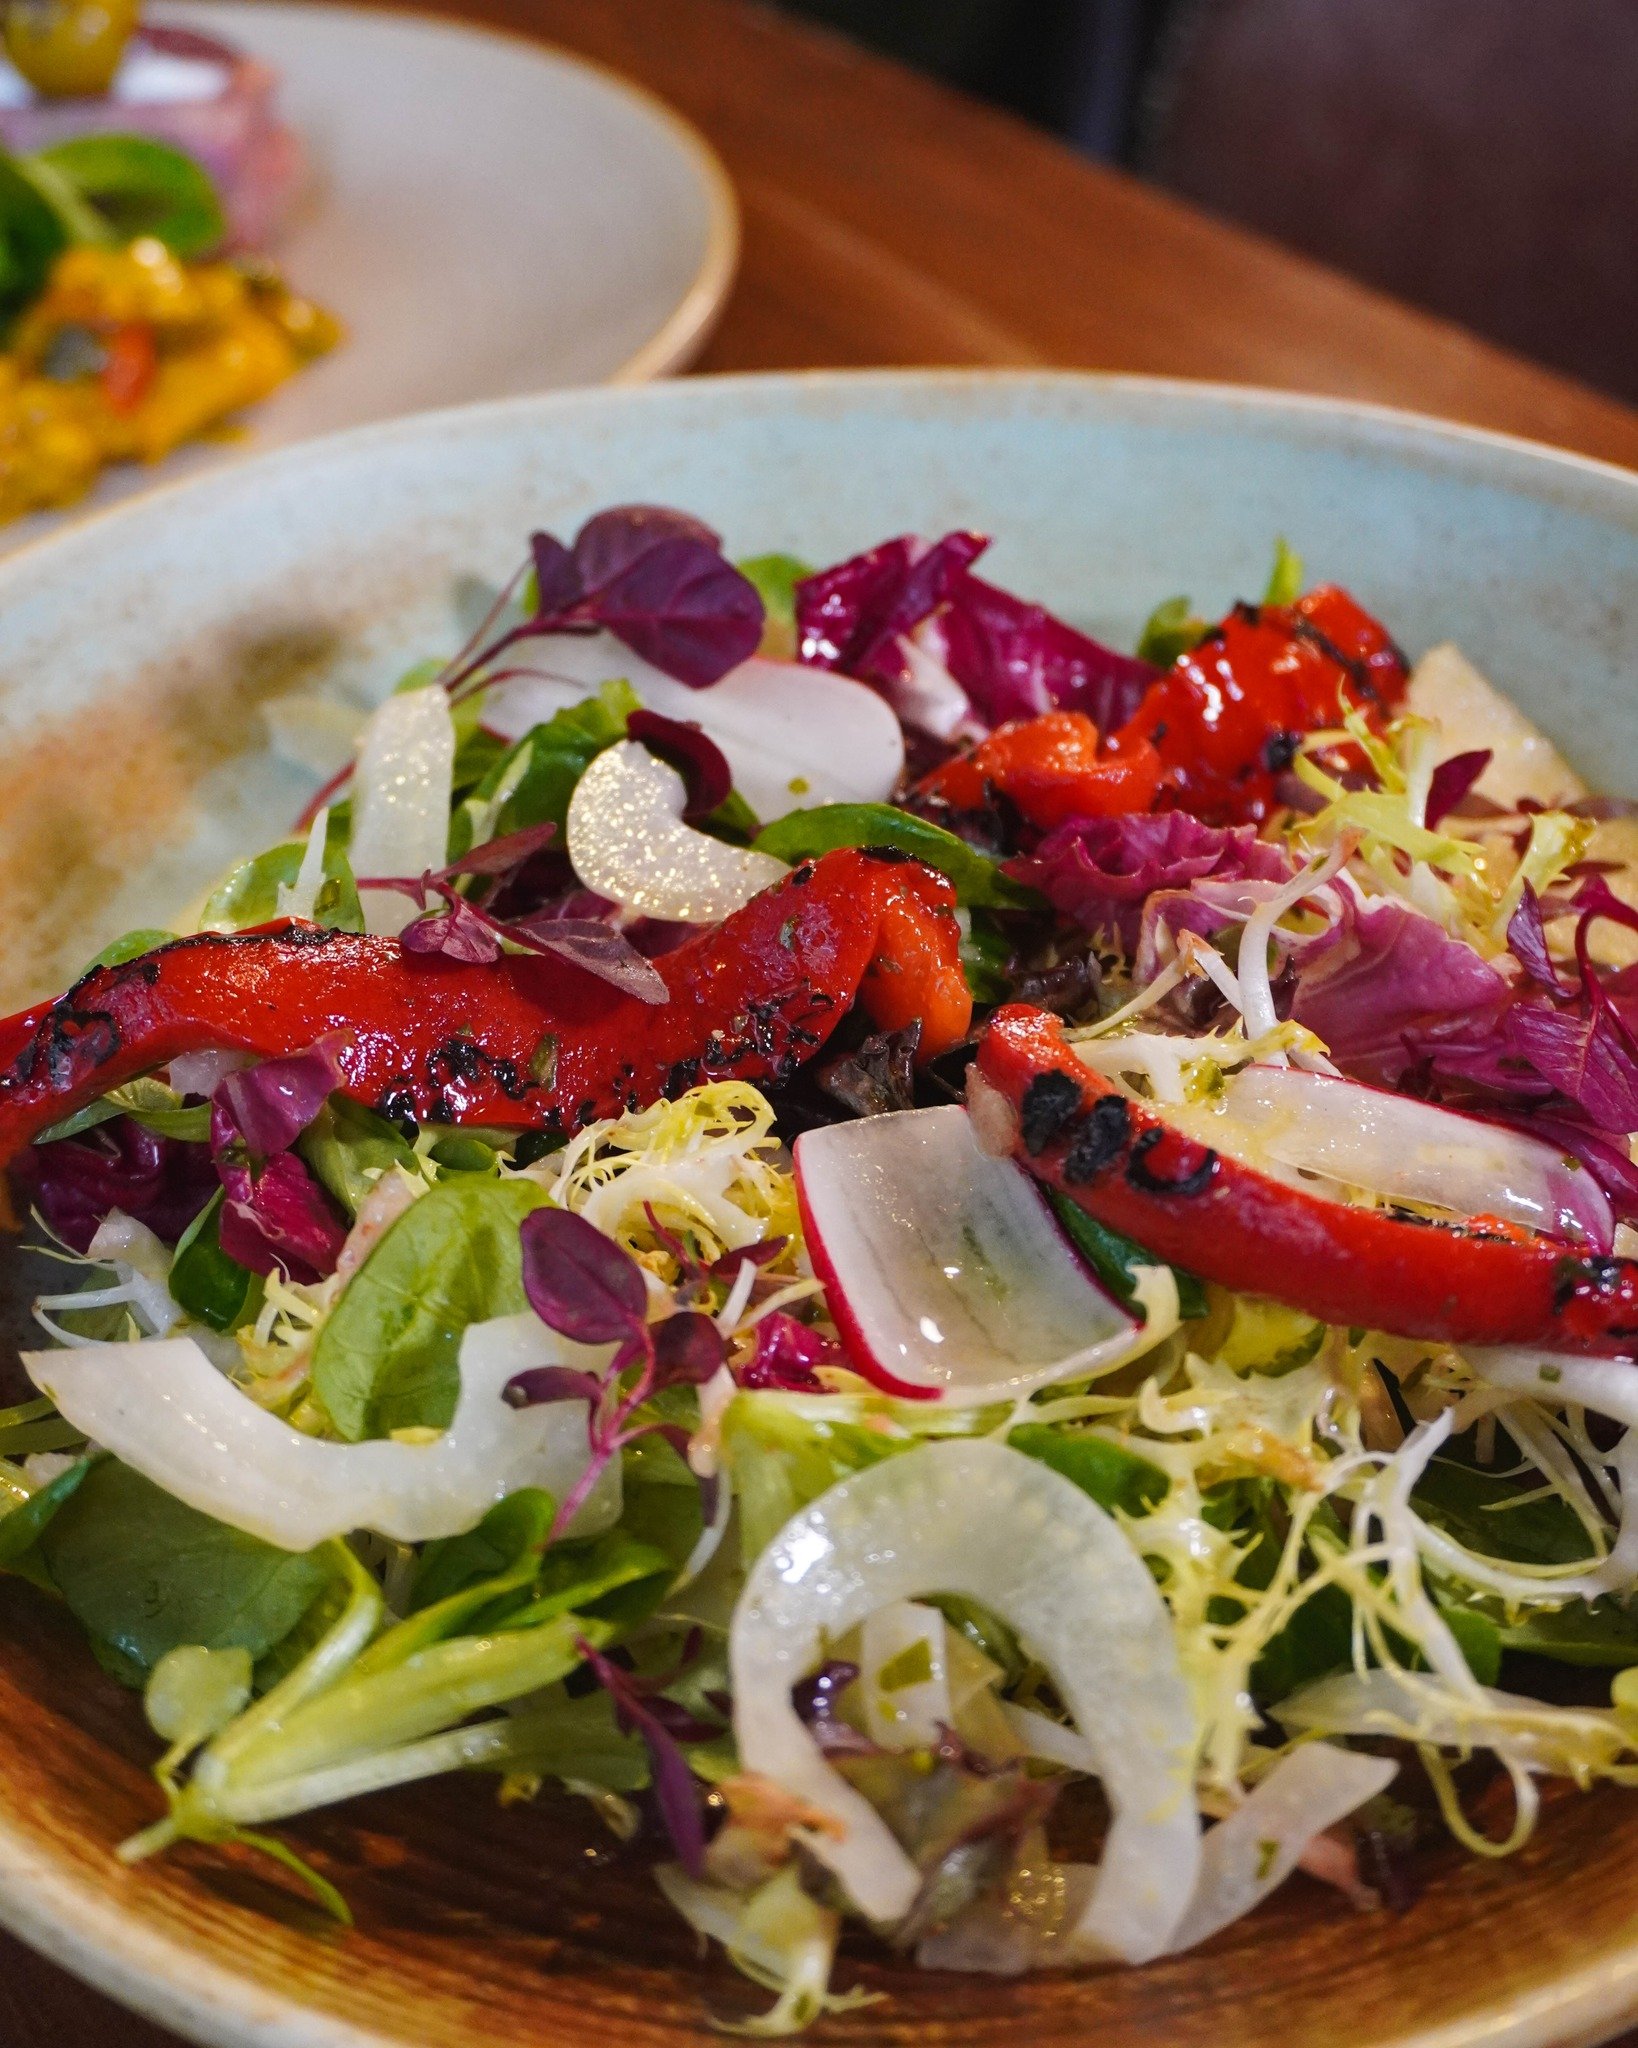 It's officially salad season! 🥗

Brighten up your meal with a fresh Spring Apple &amp; Fennel Salad from our new Spring Menu 🤩

Bursting with flavour and packed full of roquito peppers, in season radish and complimented with a lemon and basil dress